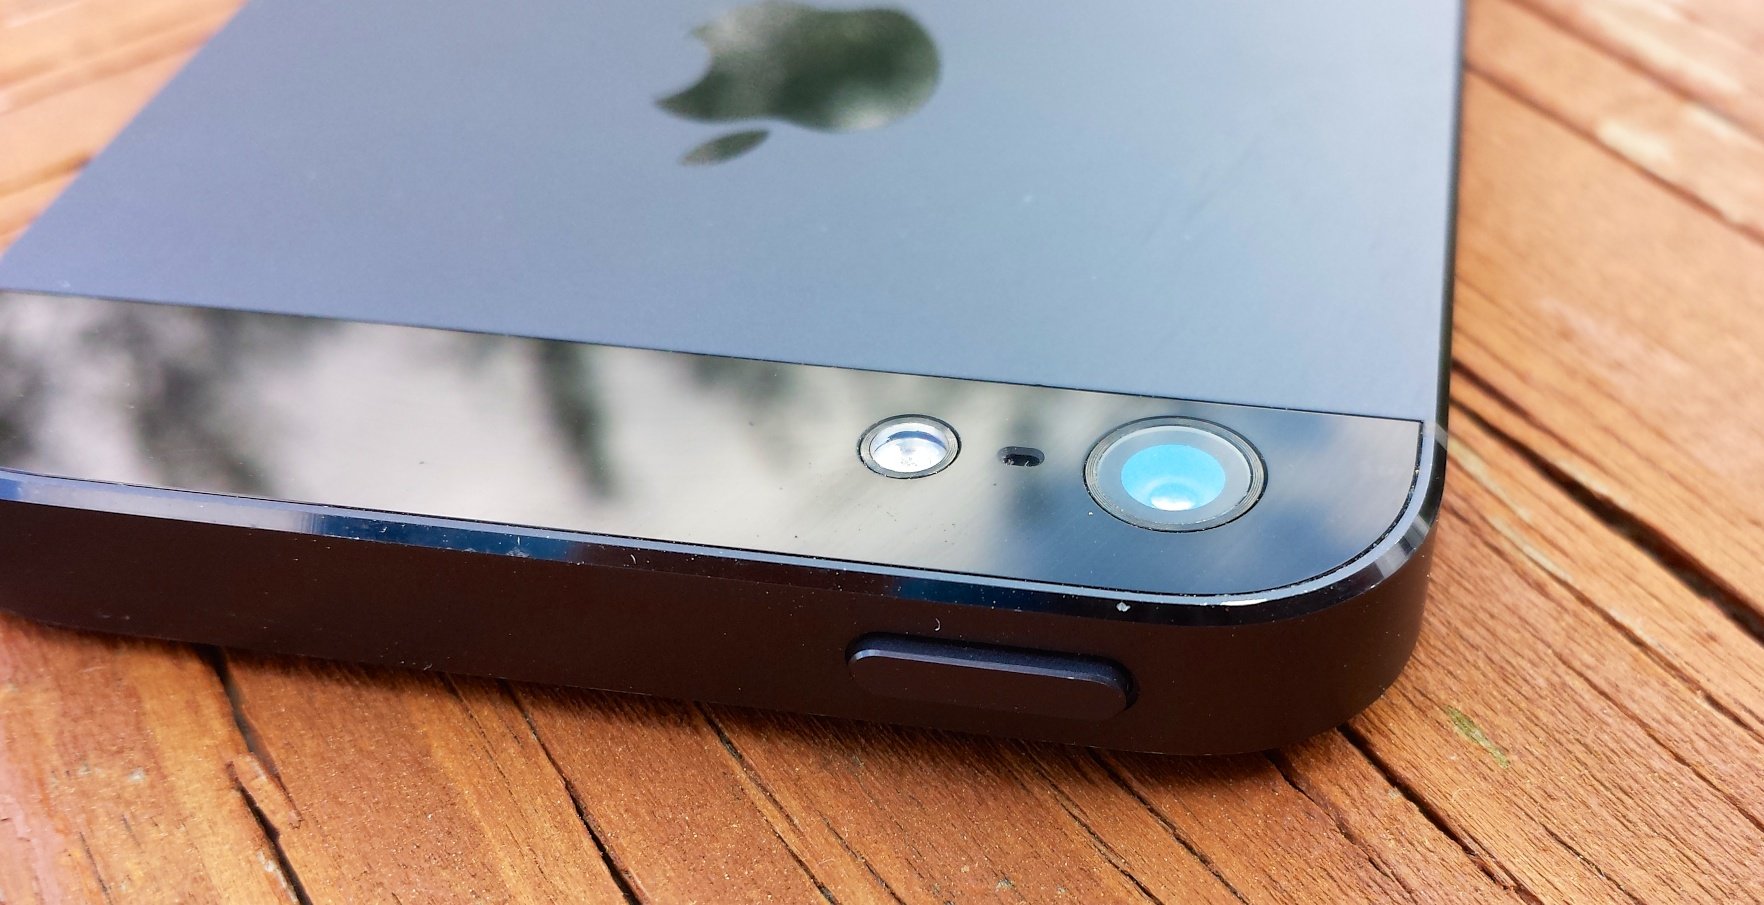 Alleged iPhone 5S parts leak pointing to an internal redesign.